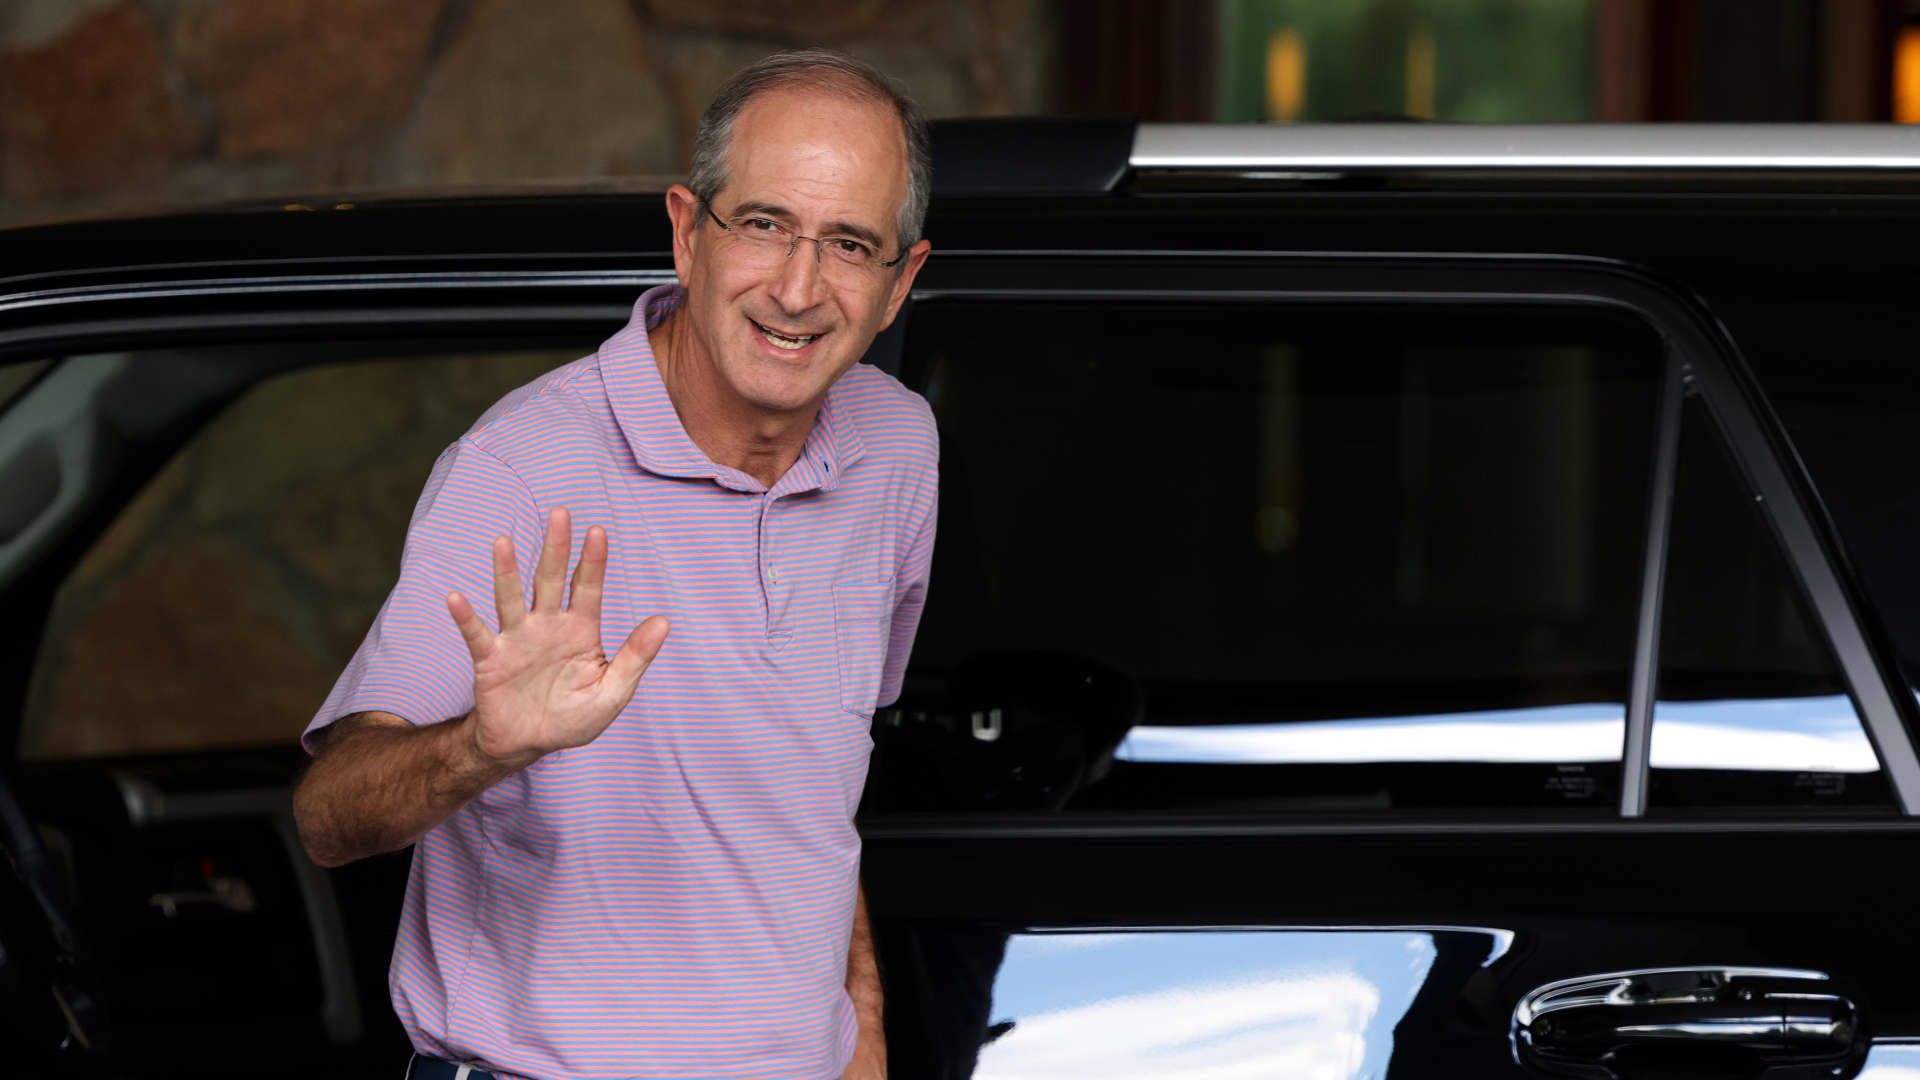 CEO of Comcast Brian Roberts arrives for the Allen & Company Sun Valley Conference on July 06, 2021 in Sun Valley, Idaho.